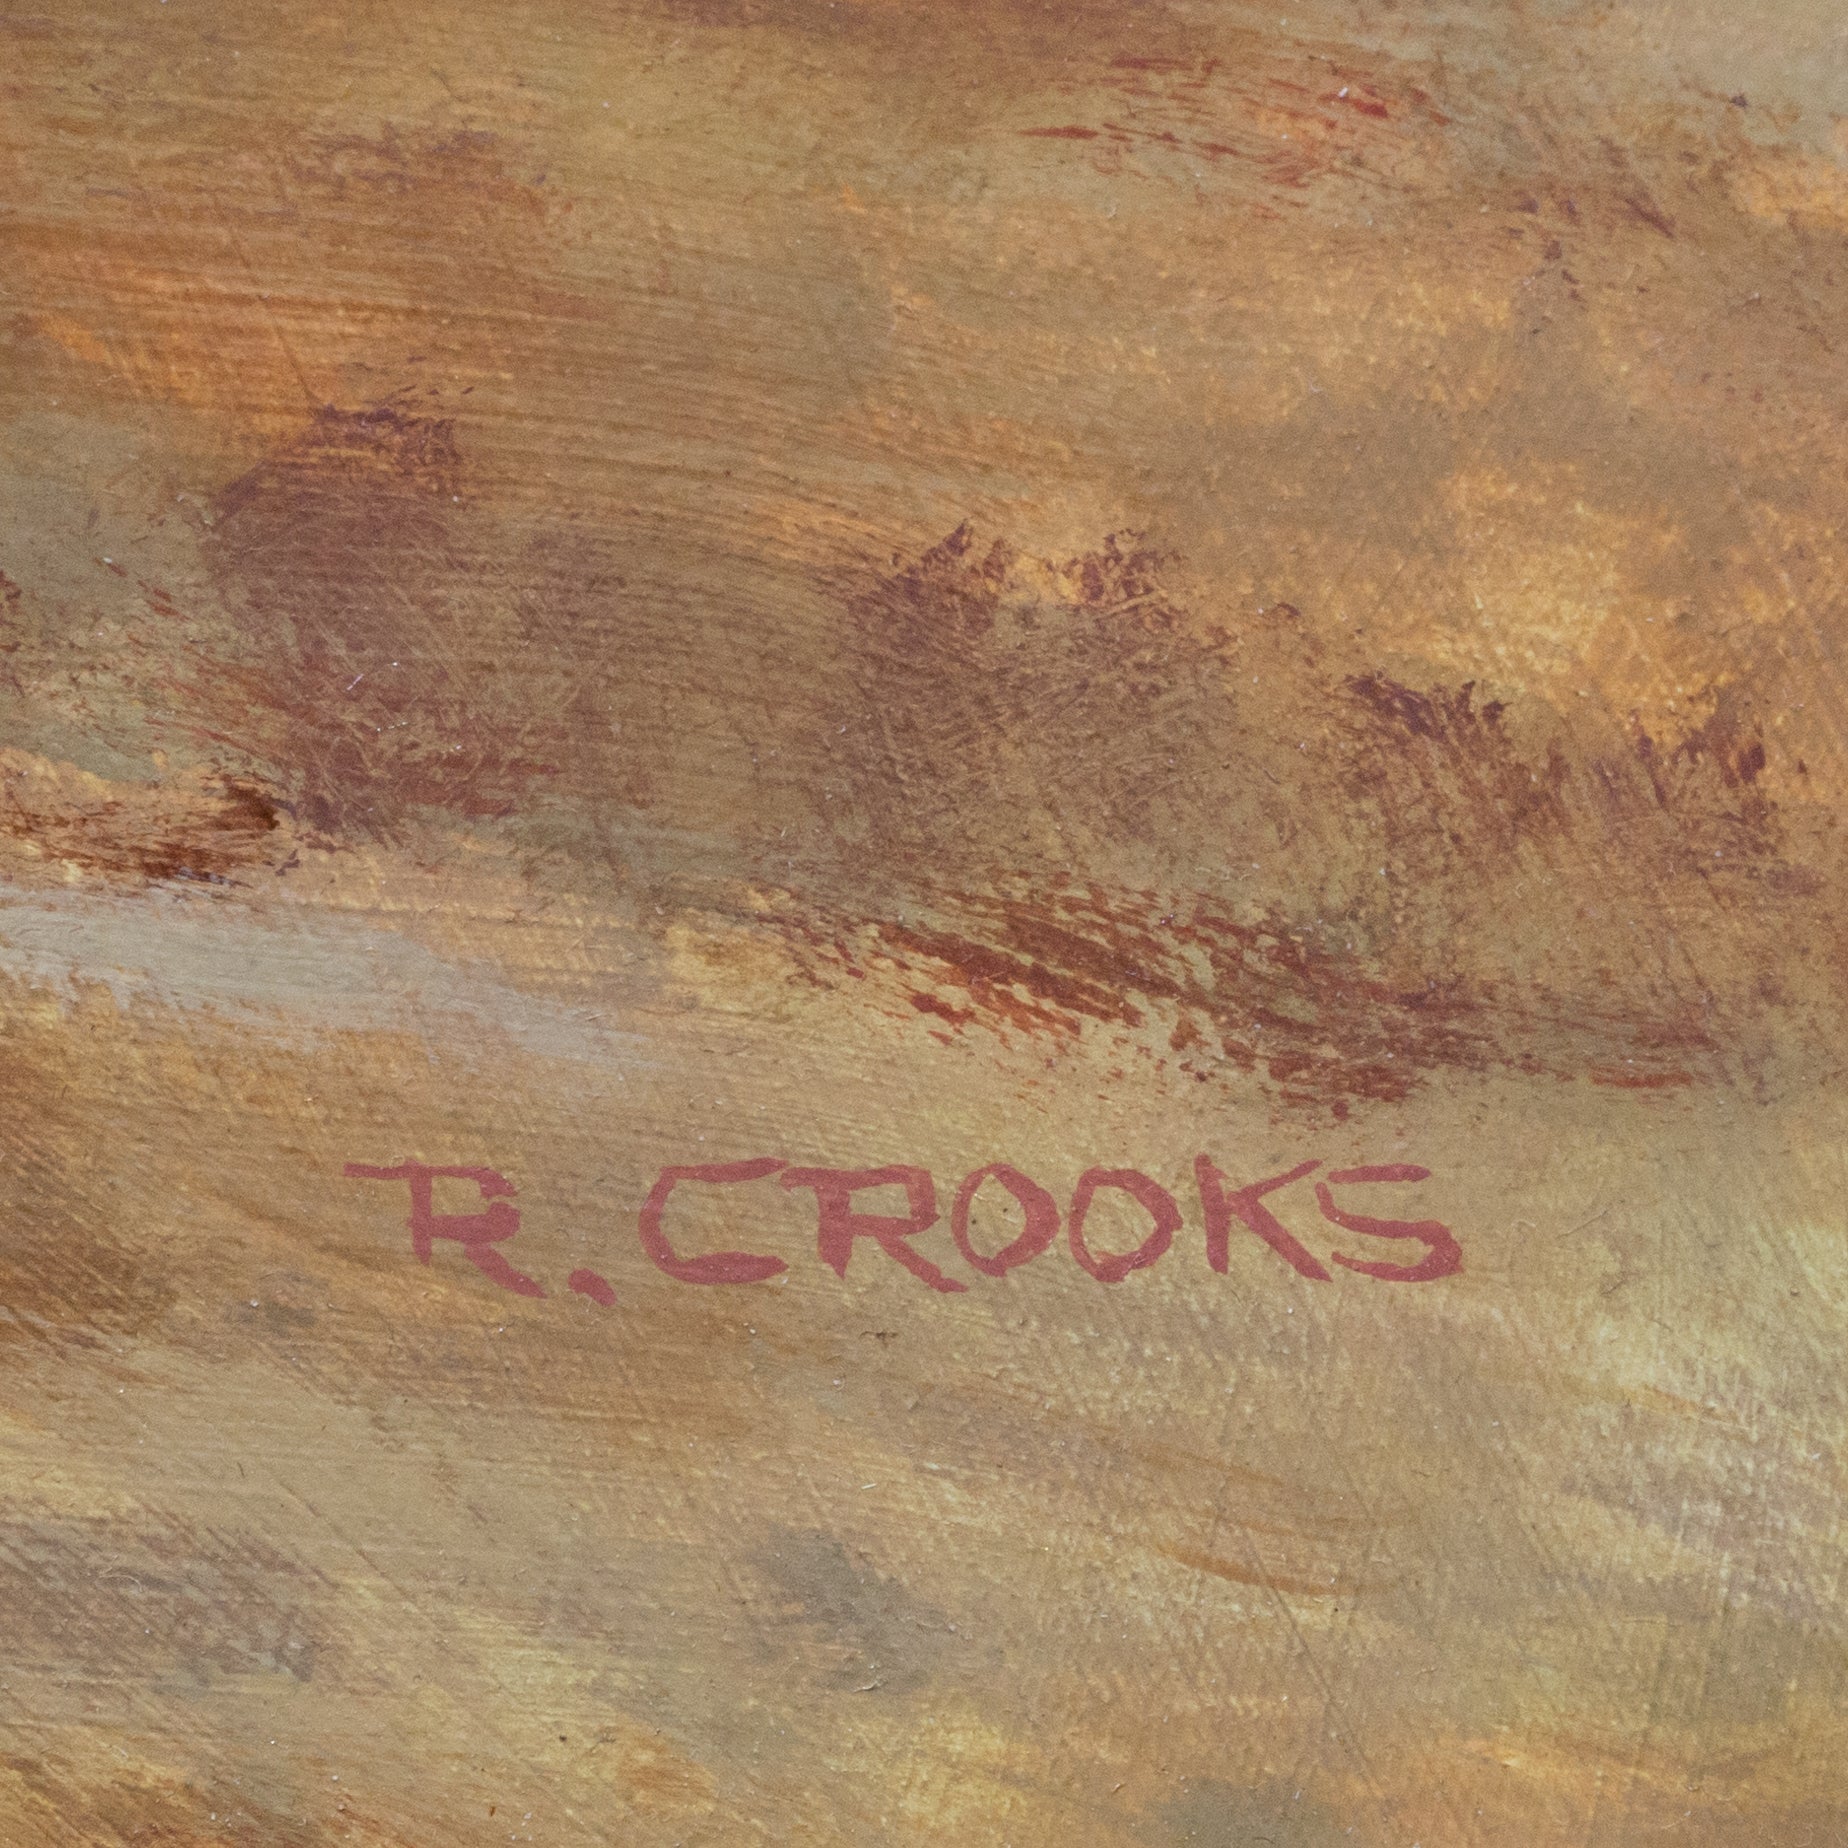 The Doolins Rode By by Ron Crooks